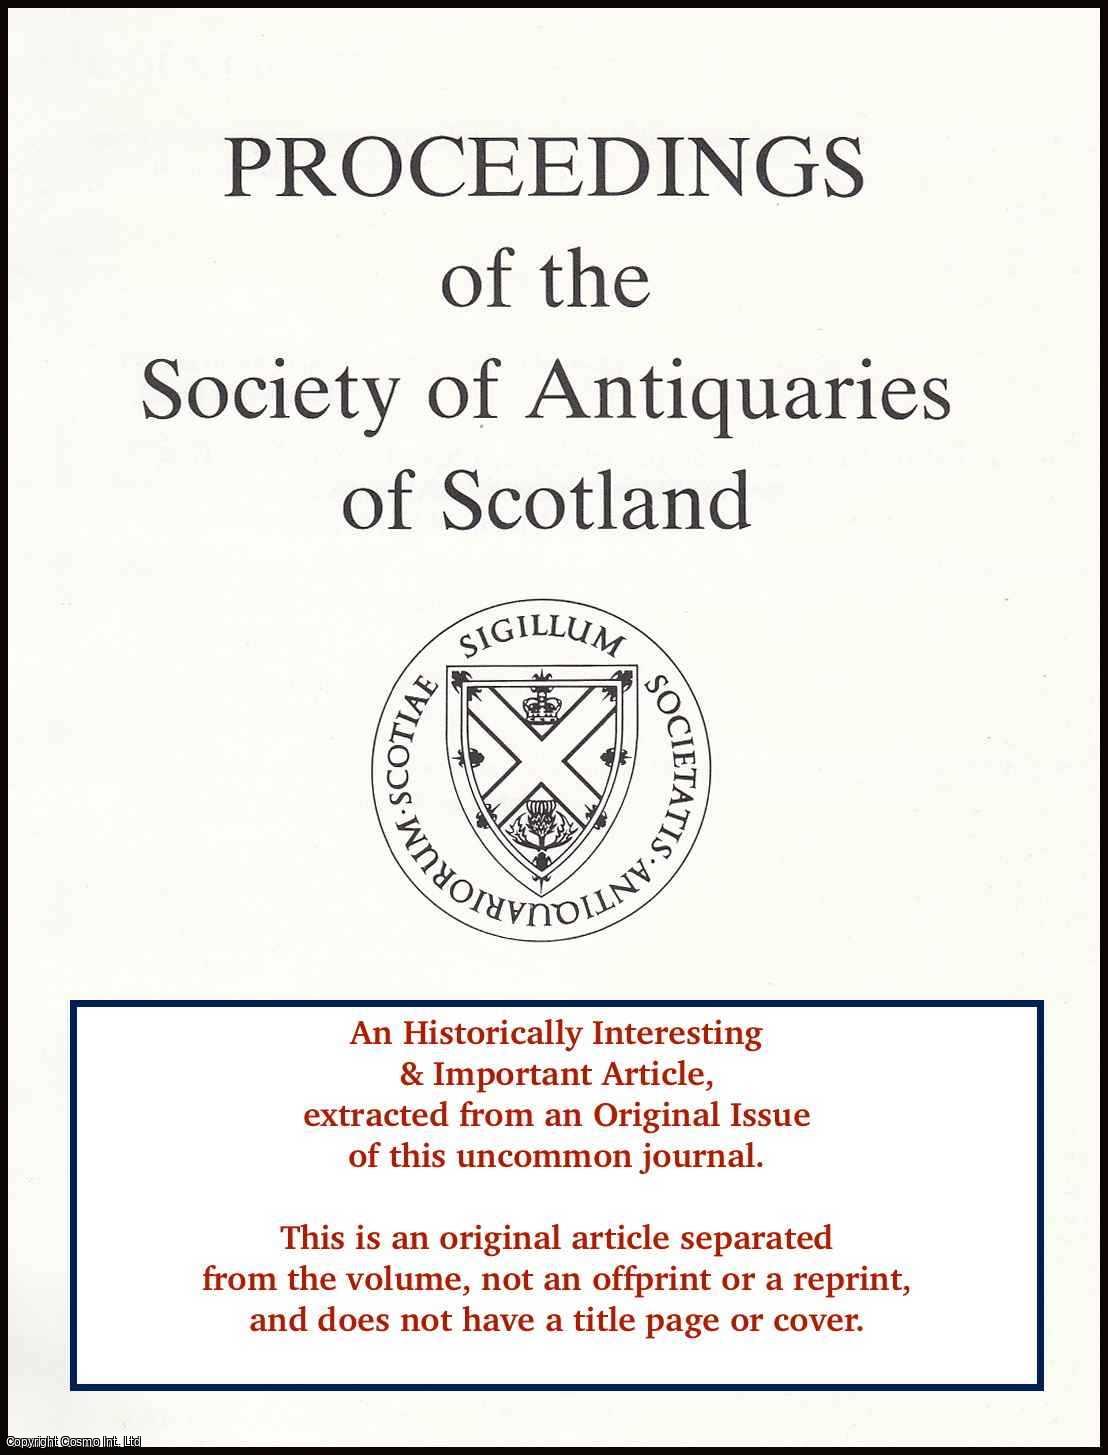 David Christison - Notices of Yetts, or Grated Iron Doors, of Scottish Castles and Towers. An original article from the Proceedings of the Society of Antiquaries of Scotland, 1887-88.